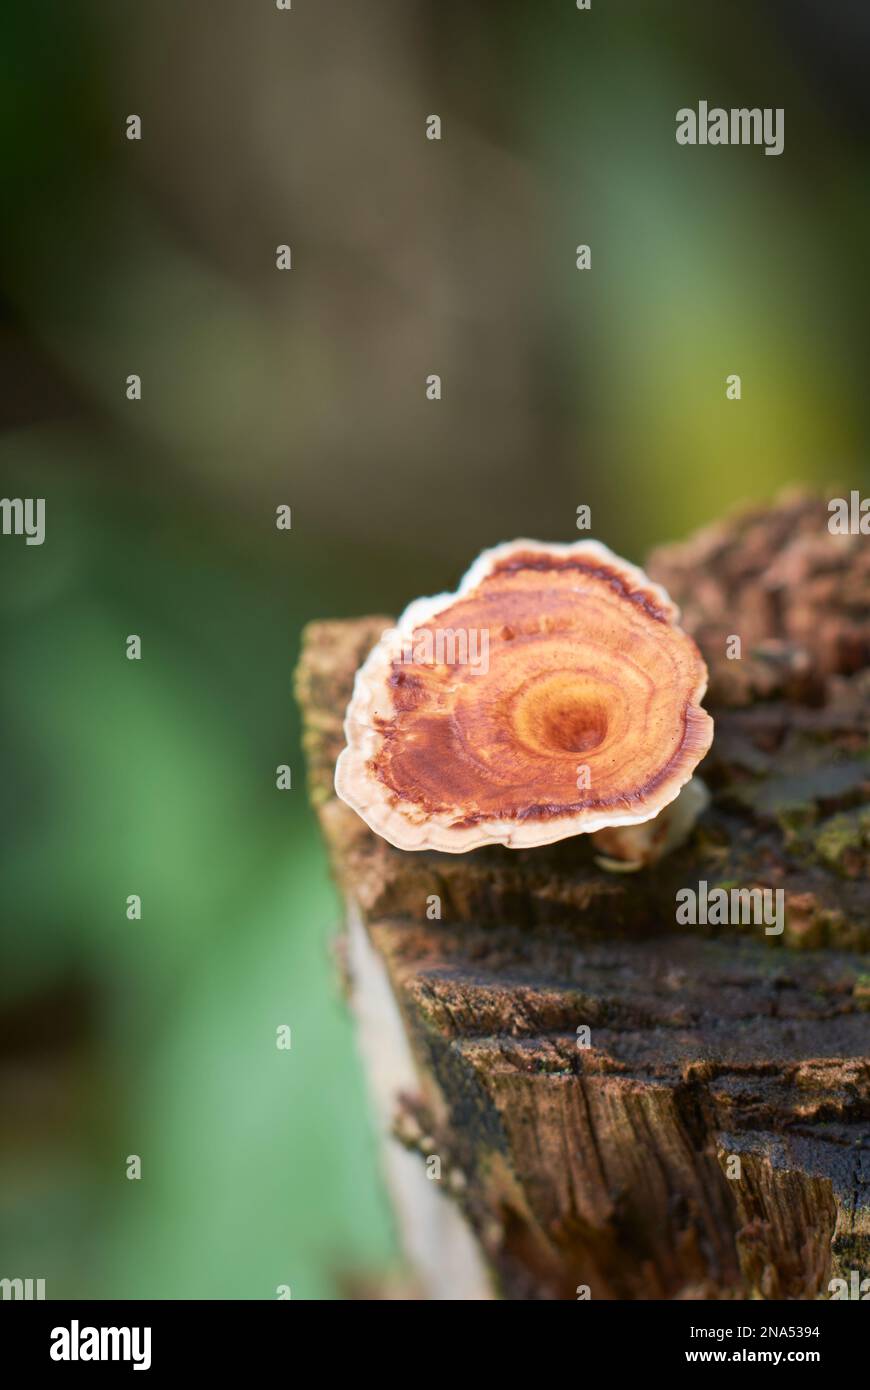 orange fungi grow on dead tree trunk, close-up macro view of fungus that digests moist wood, selective focus with blurry background with copy space Stock Photo